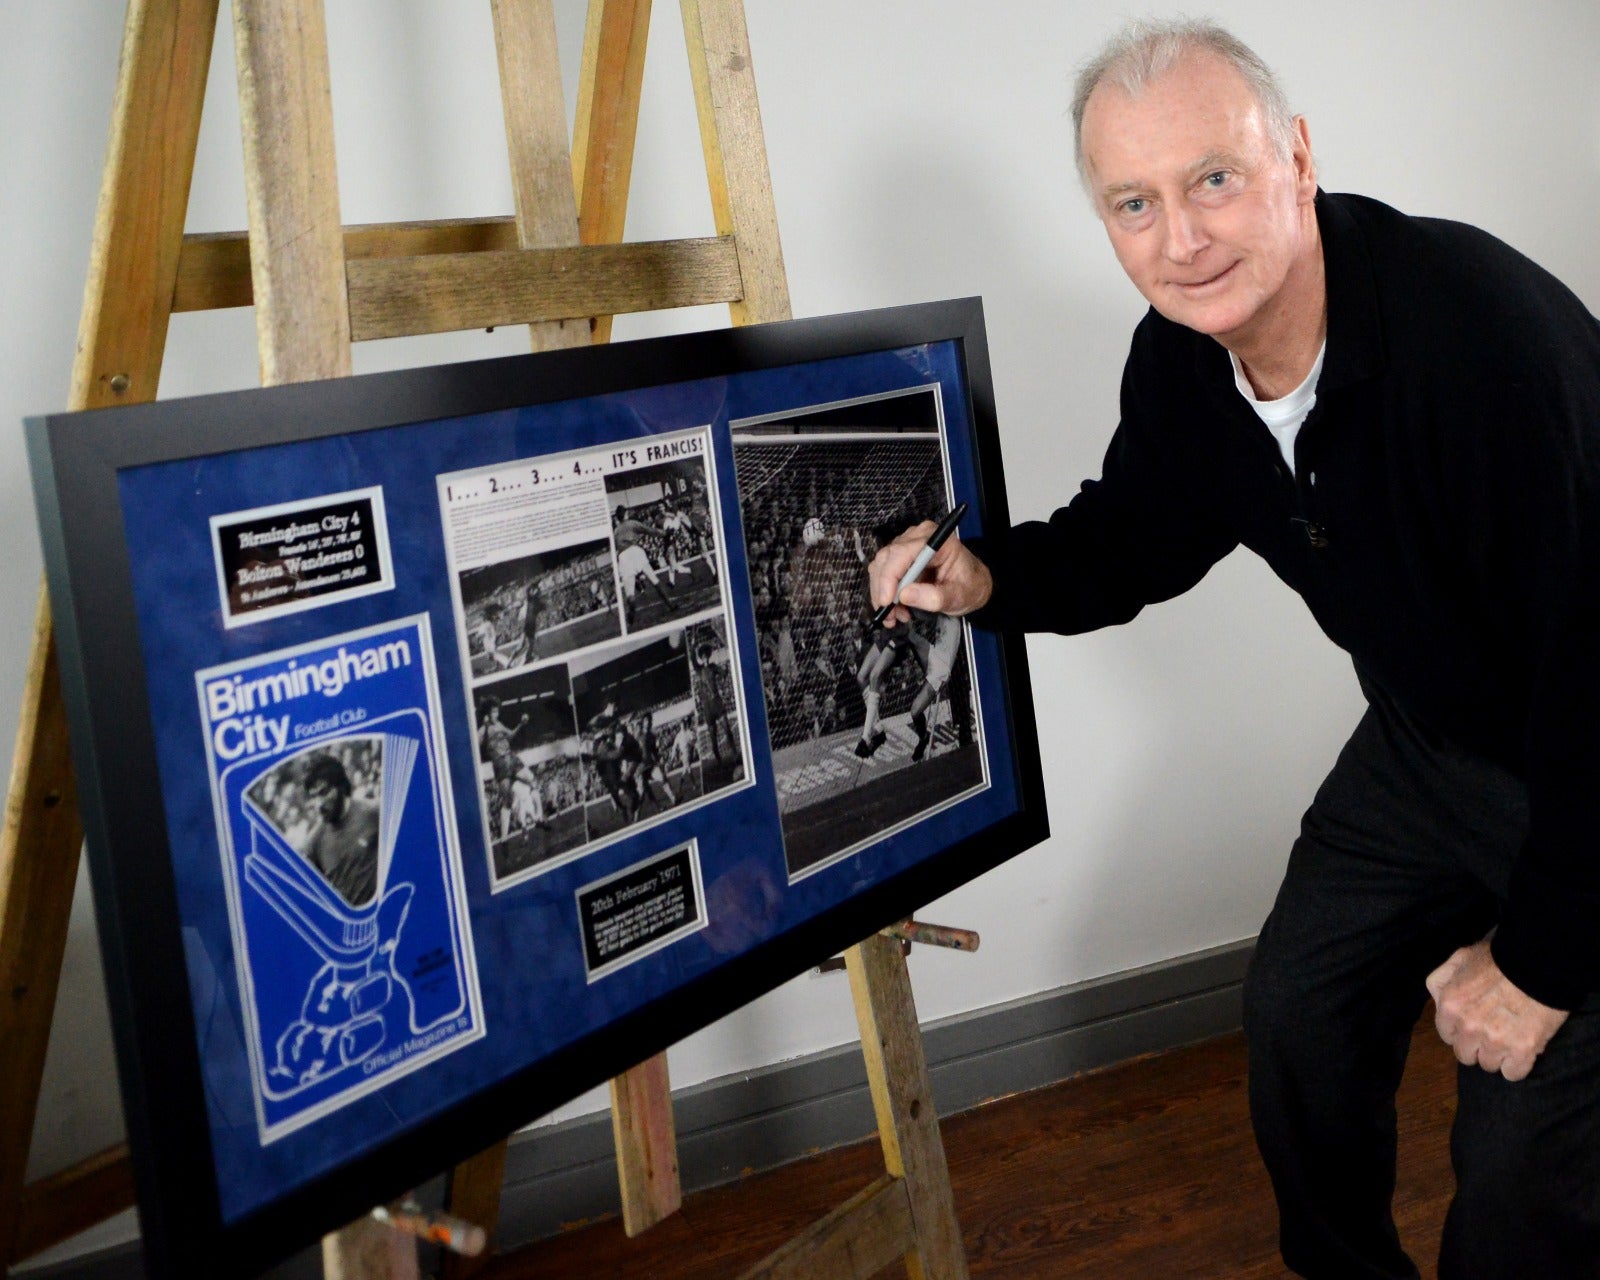 *** Fathers Day Special FREE 16 x 12" Surprise Colour Signed photo with every purchase! *** Trevor Francis 50 years celebration signed frame - 4 goals as a 16 year old! Free UK Delivery!